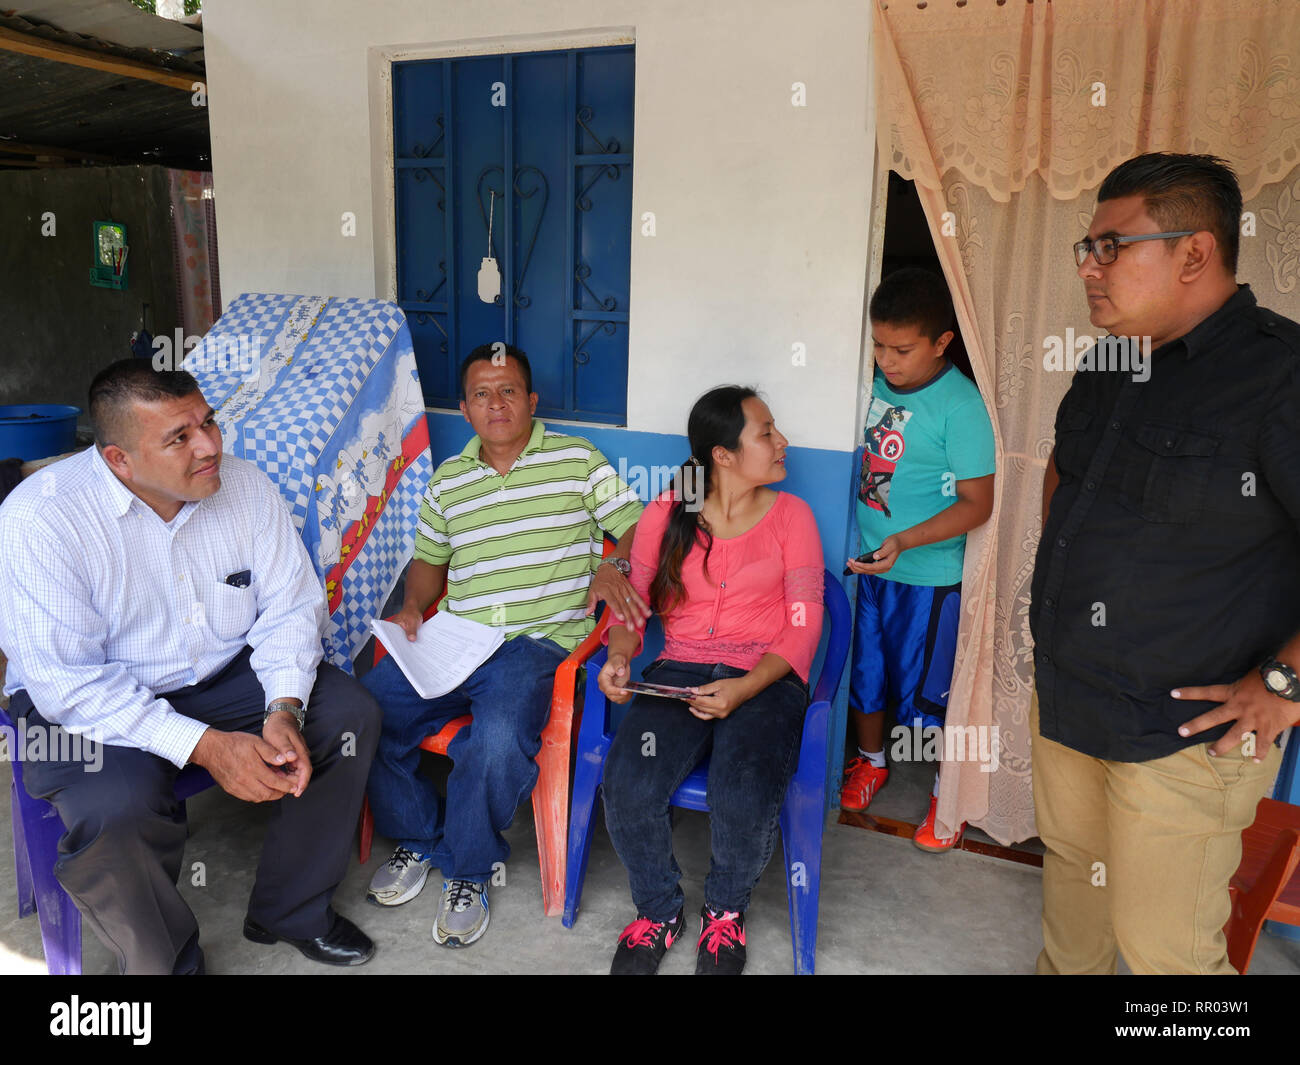 EL SALVADOR  Santos Pastor Paulino, 43, with his daughter Alexandra Yamileth, 20, at their home near Cuscatlan, being visited by Luis Lopez of COFAMIDE and Santiago Salinas of SEAL. Stock Photo